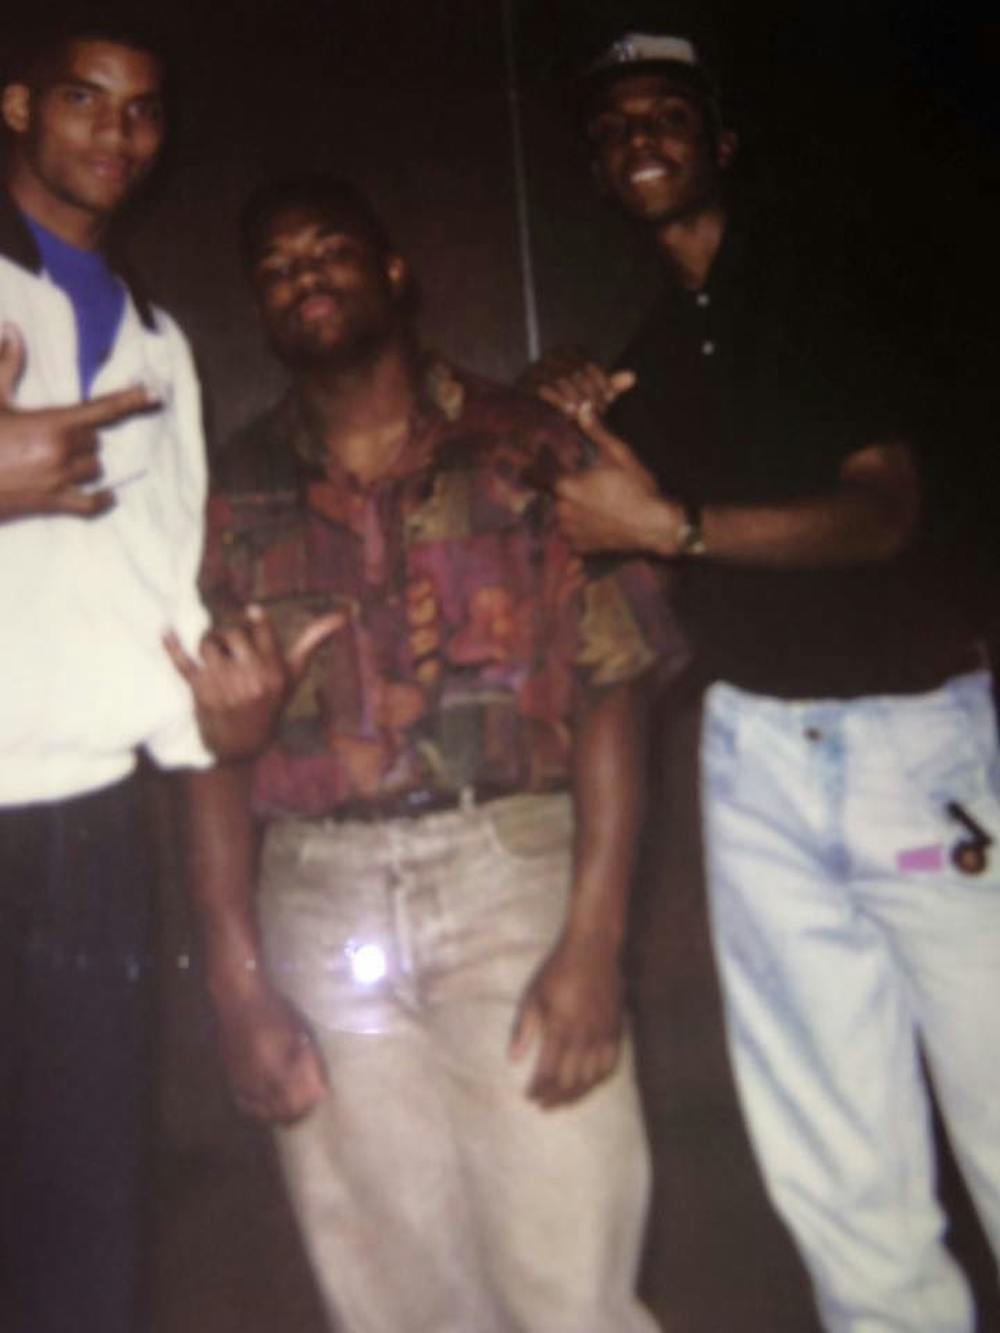 <p>Former Tiger football player Marcus "Doc" Holliday (middle) poses with his friends Anfernee "Penny" Hardaway (right) and former Tiger basketball player David Vaughn. The three have been friends since their freshman year at Memphis.</p>